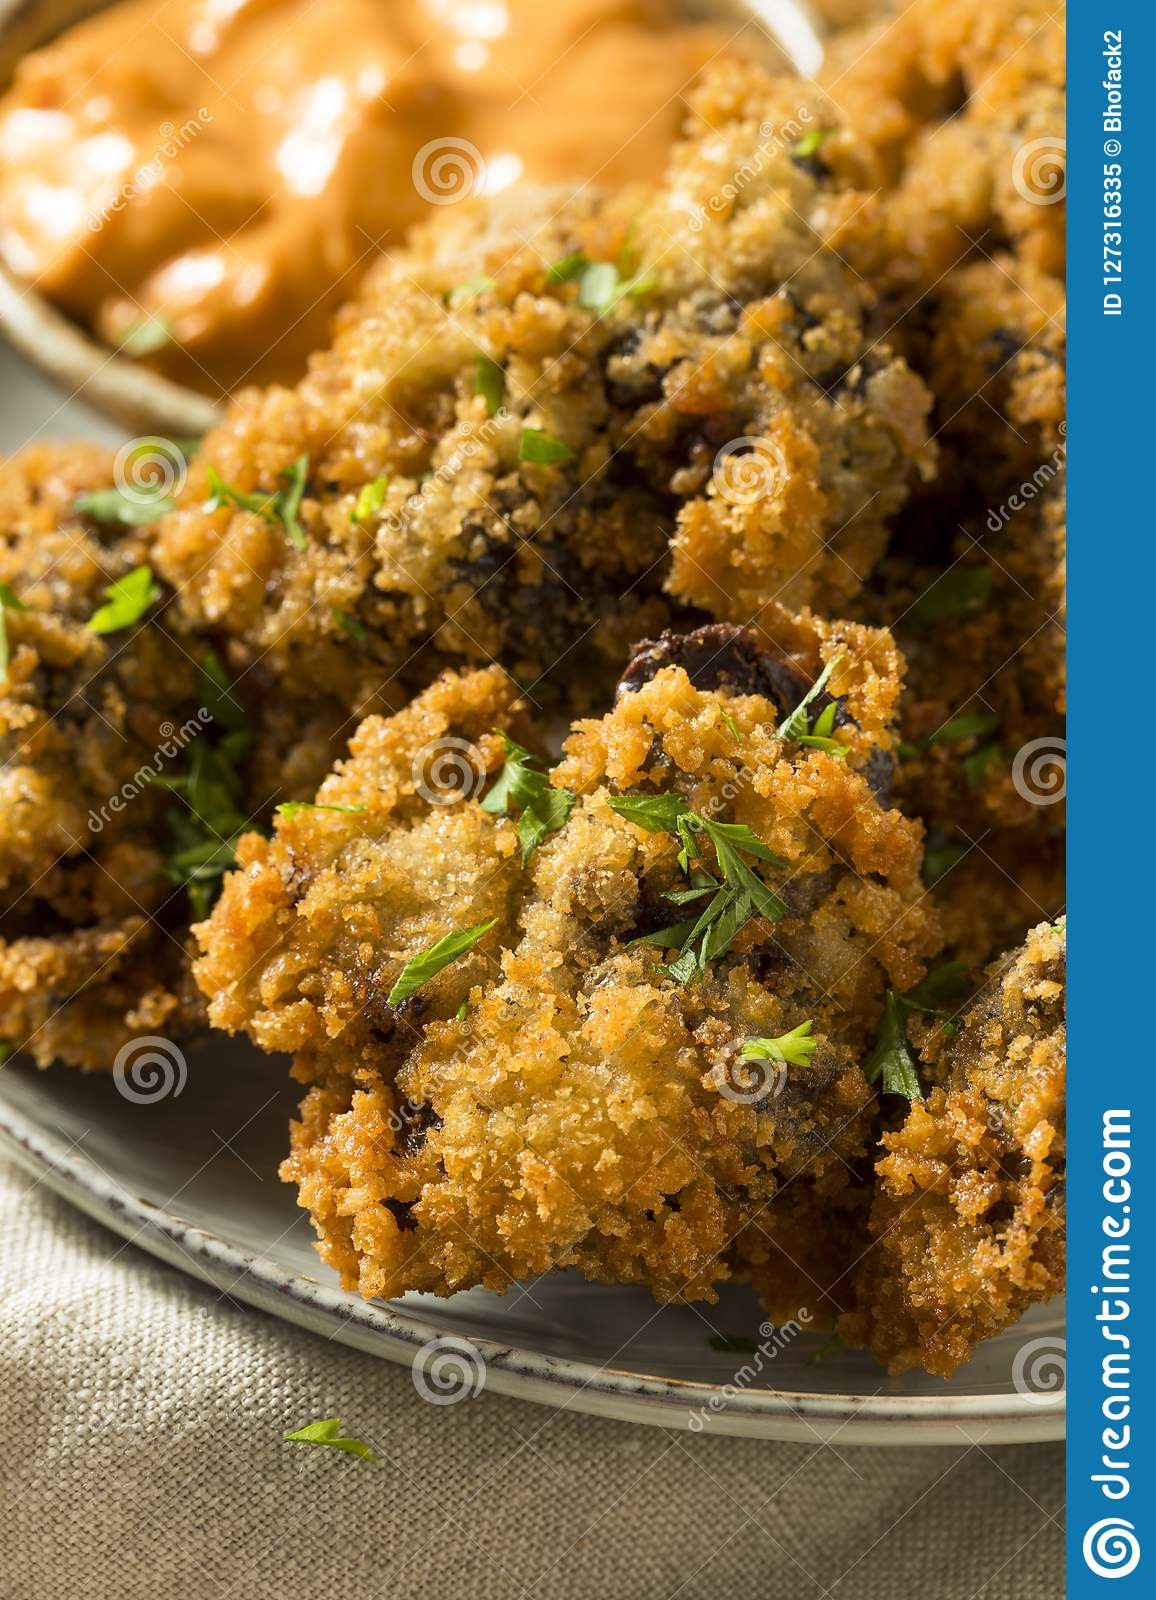 Top 20 Deep Fried Chicken Livers - Best Recipes Ideas and Collections